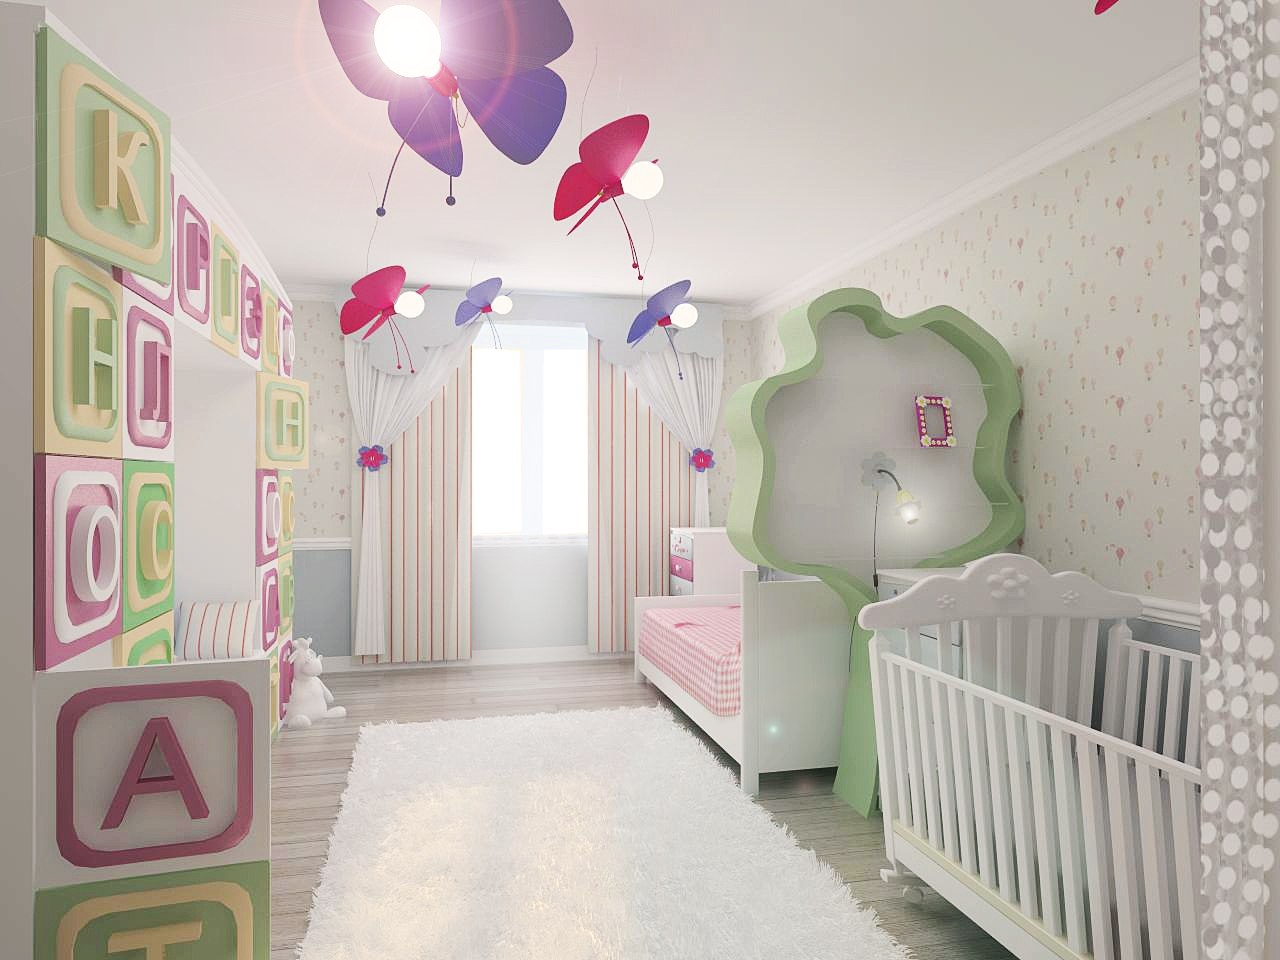 version of the beautiful style of the nursery